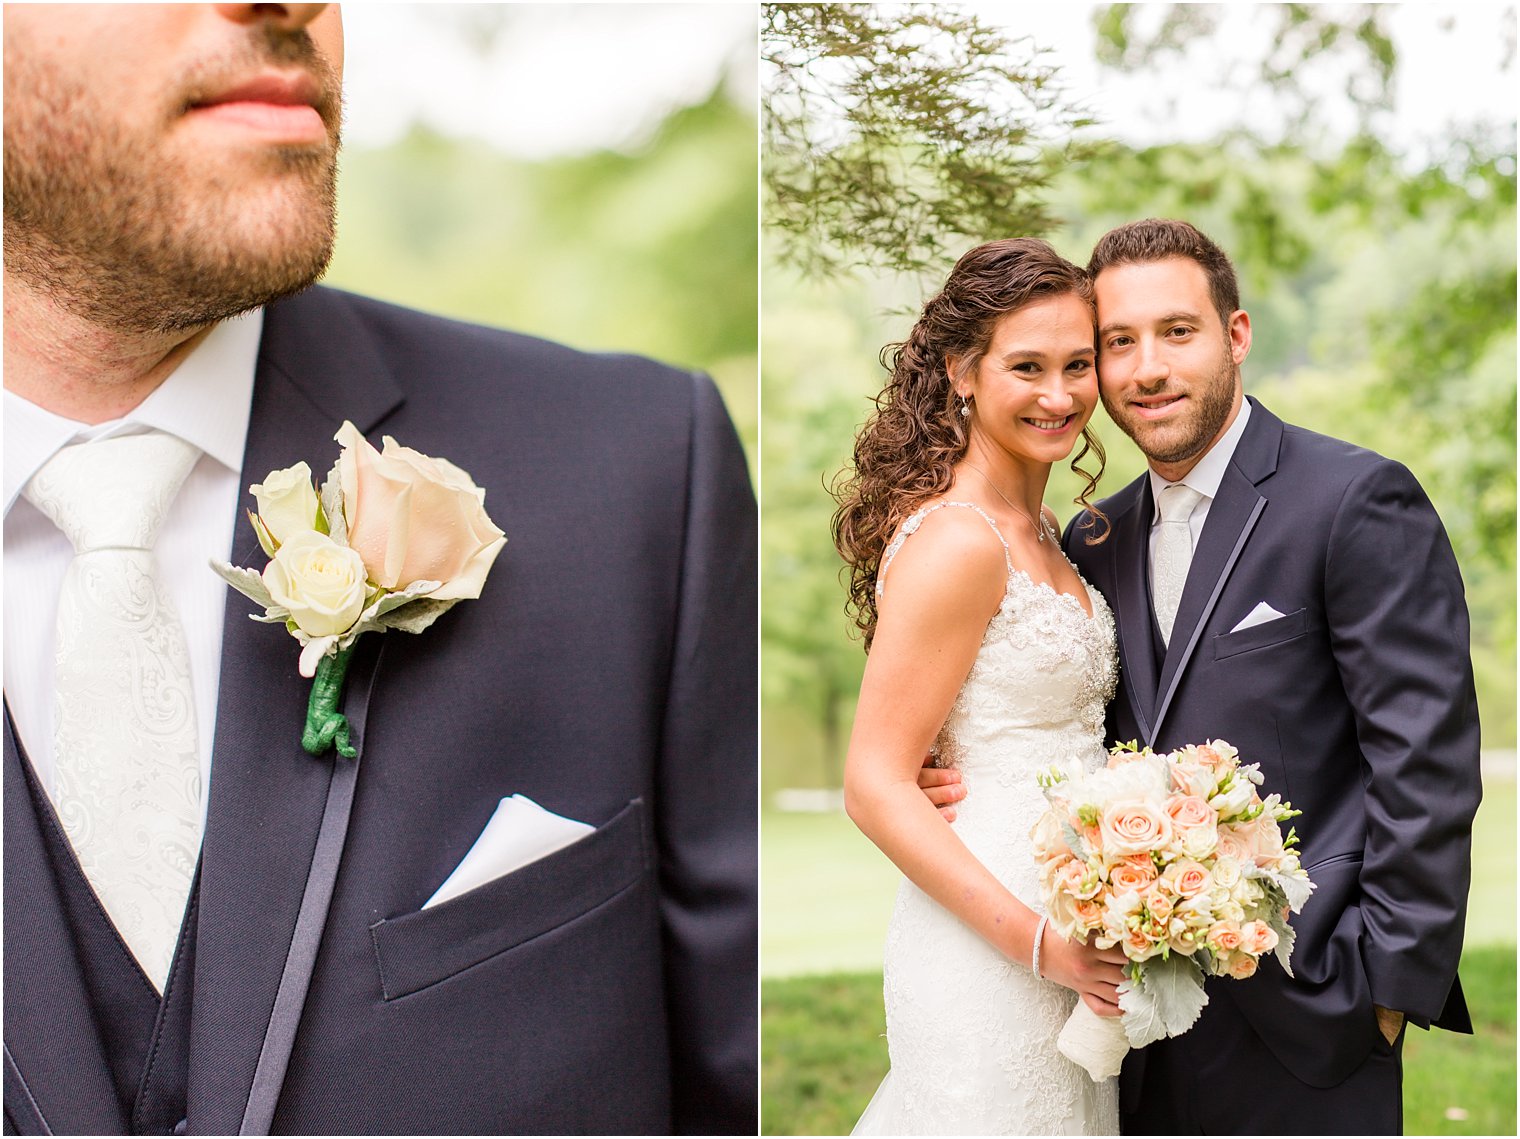 Blush and ivory bouquet and boutonniere